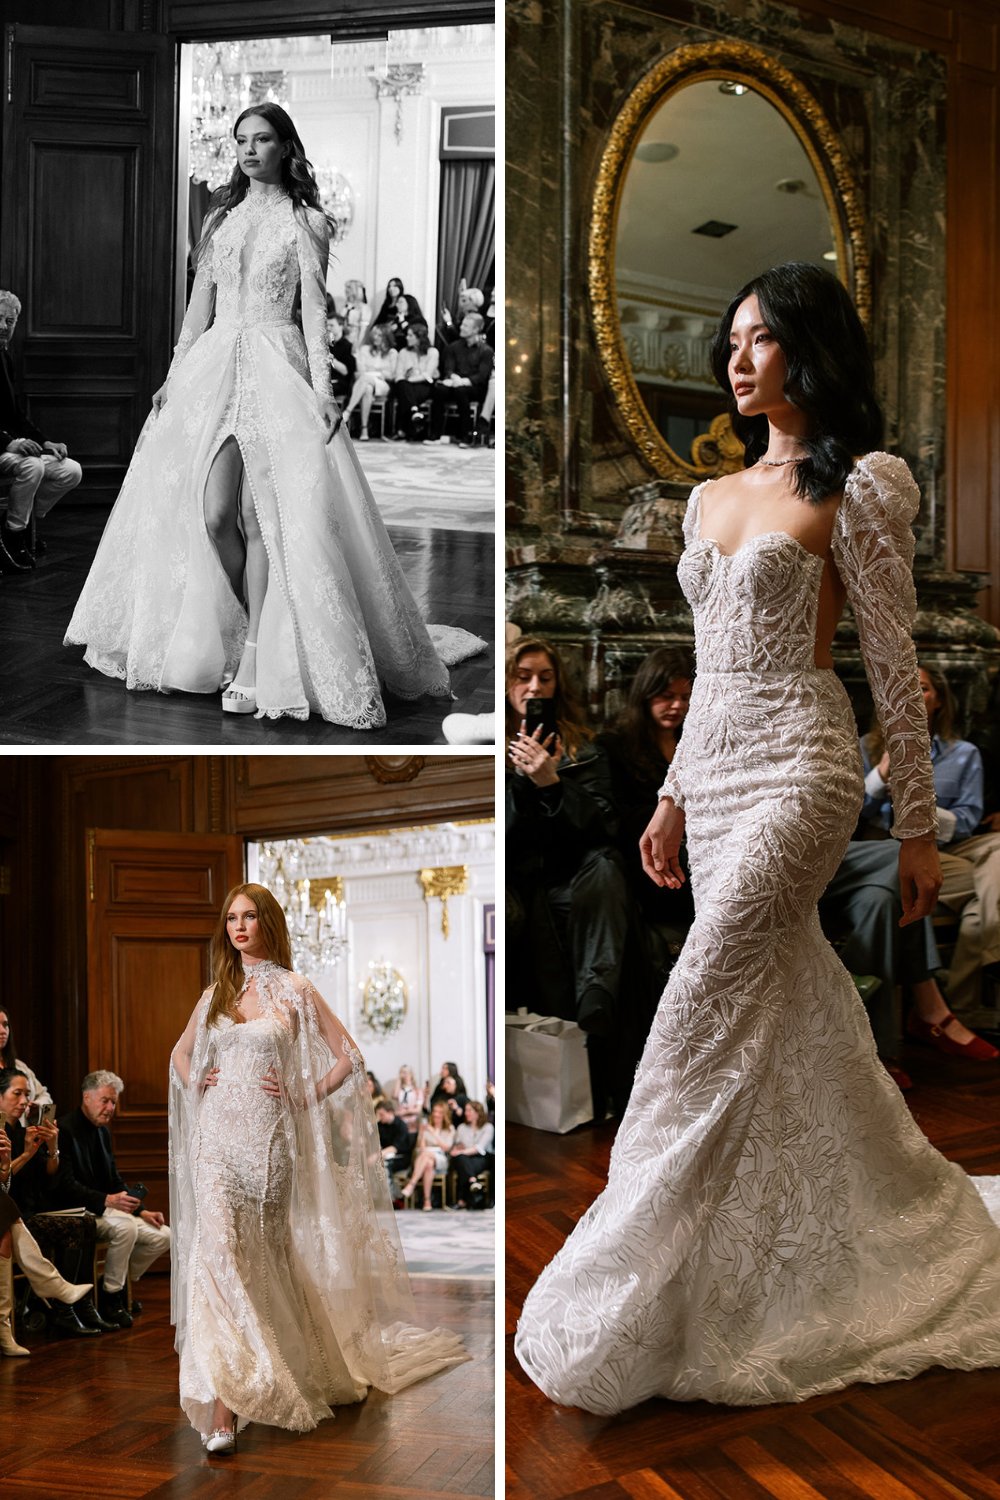 Beaded and embellished wedding gowns